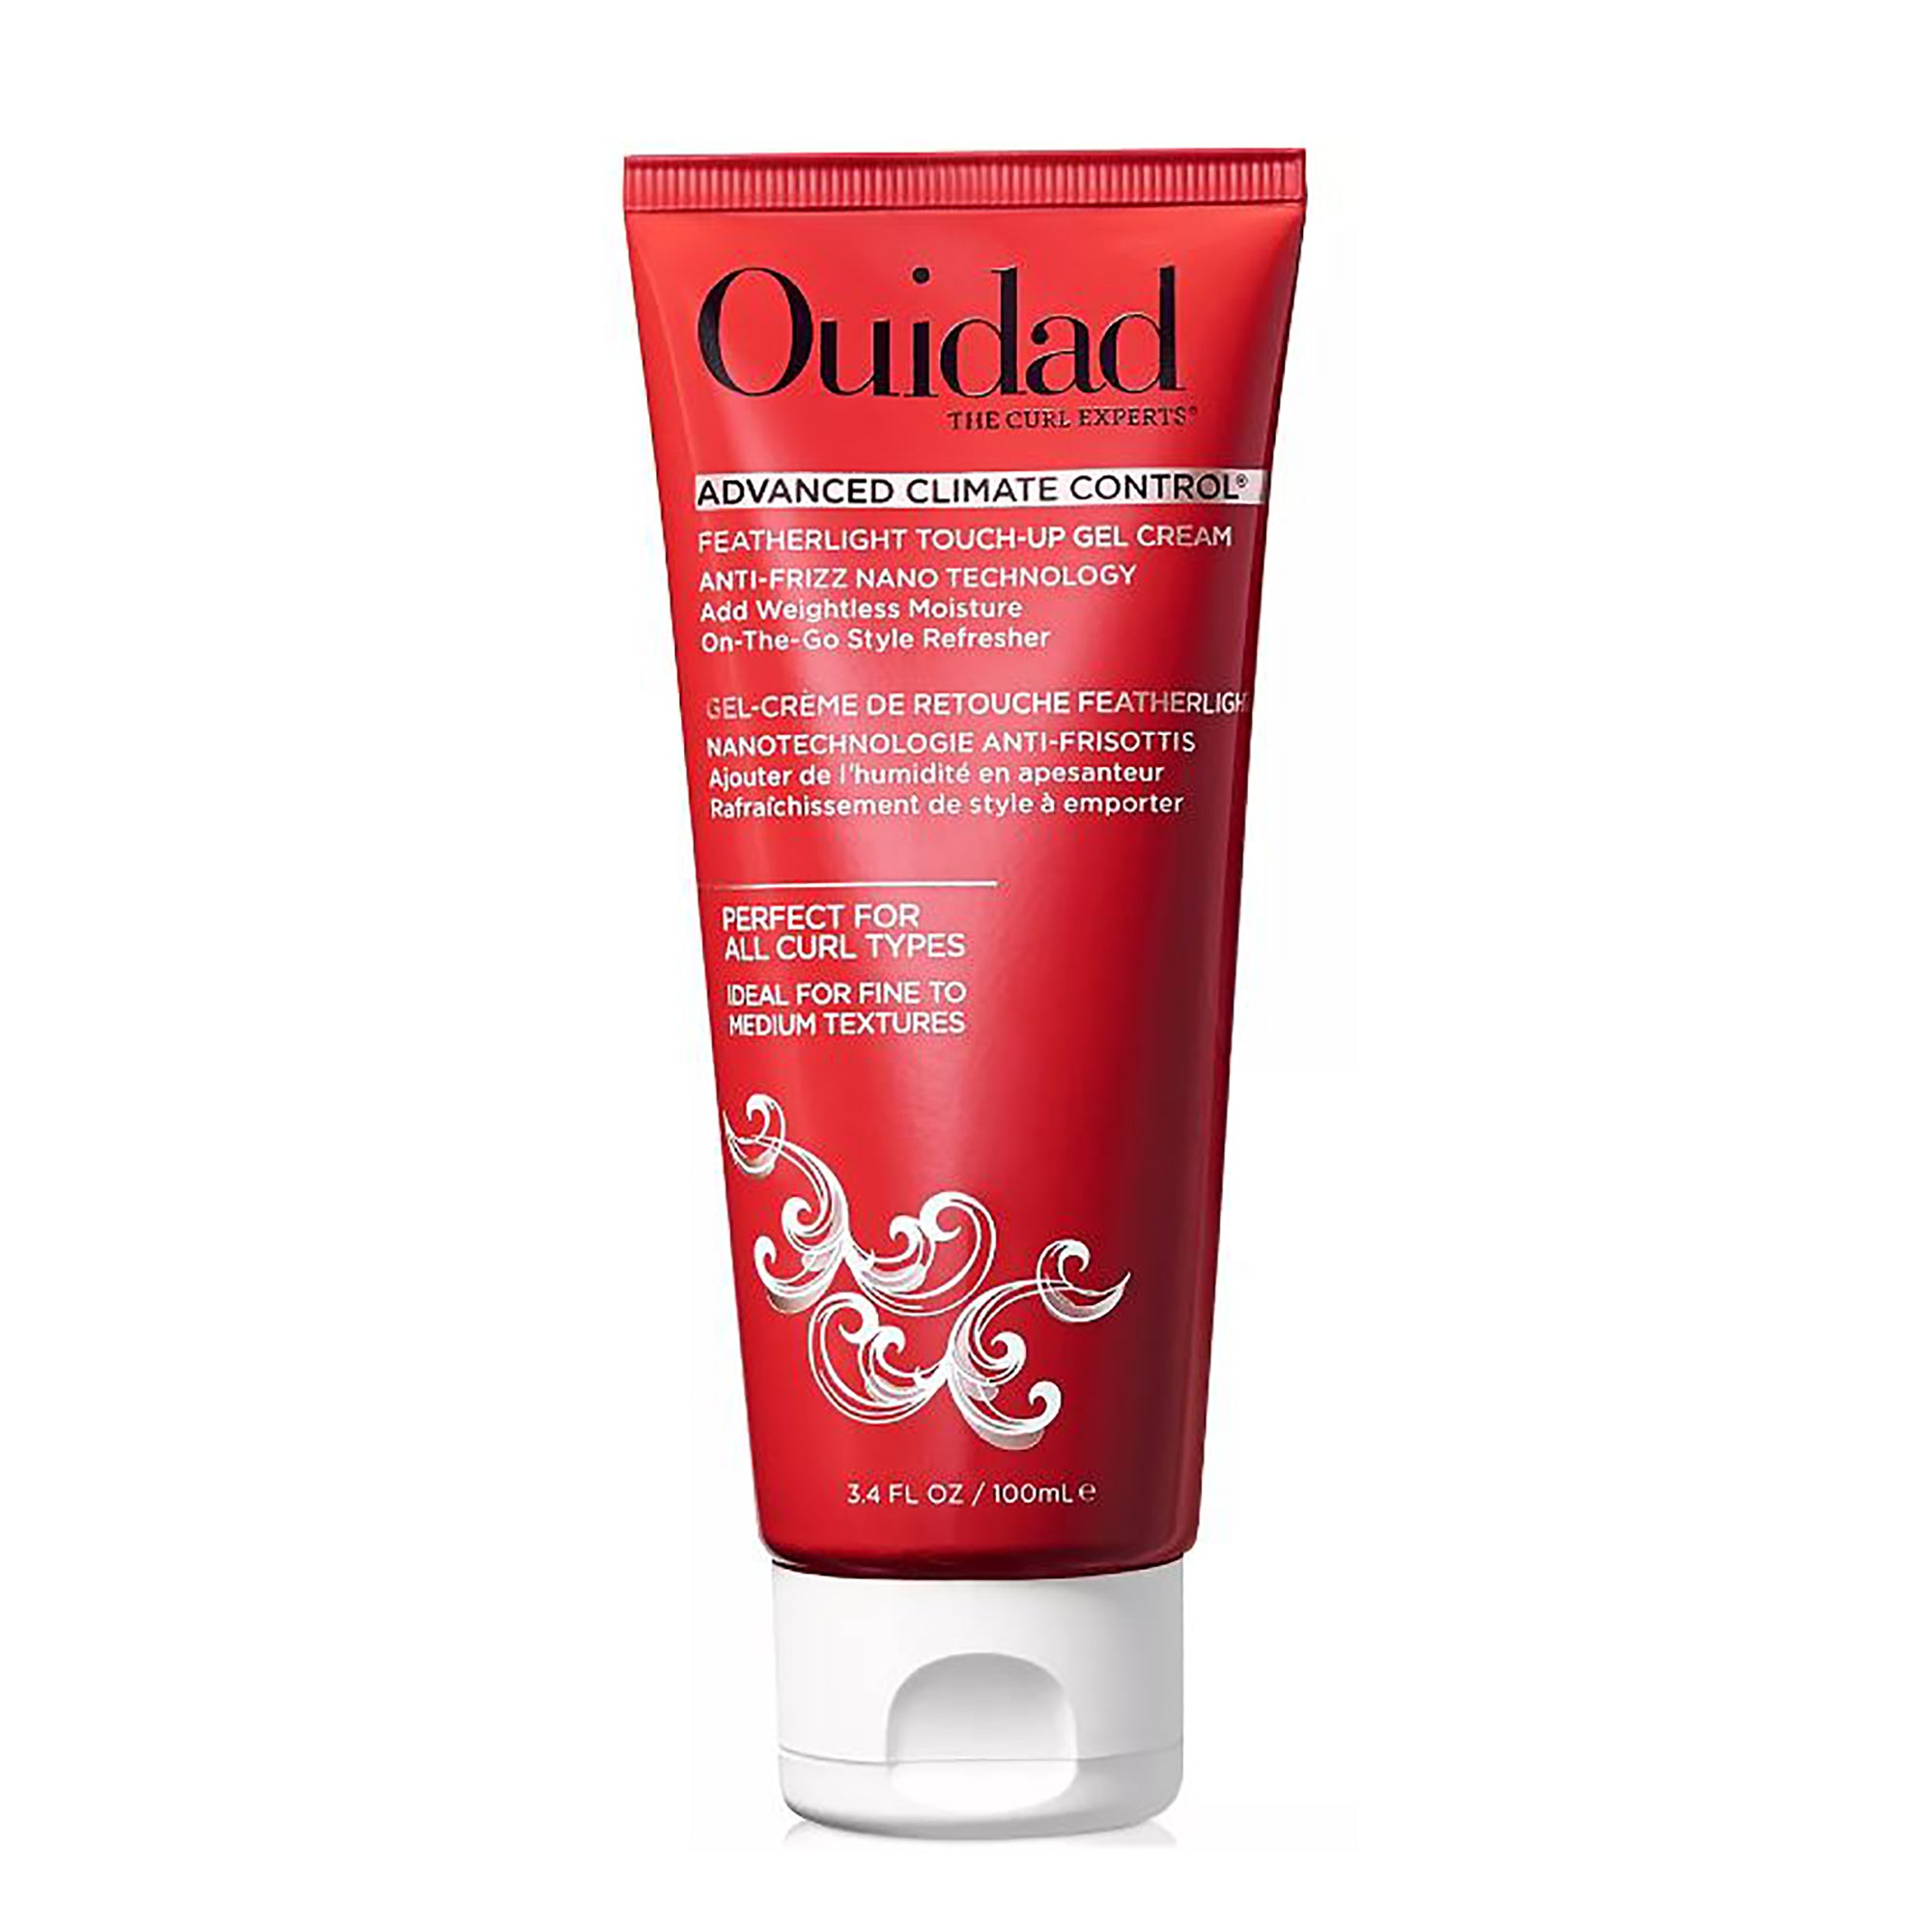 Ouidad Advanced Climate Control Featherlight Touch-Up Gel Cream / 3.4OZ